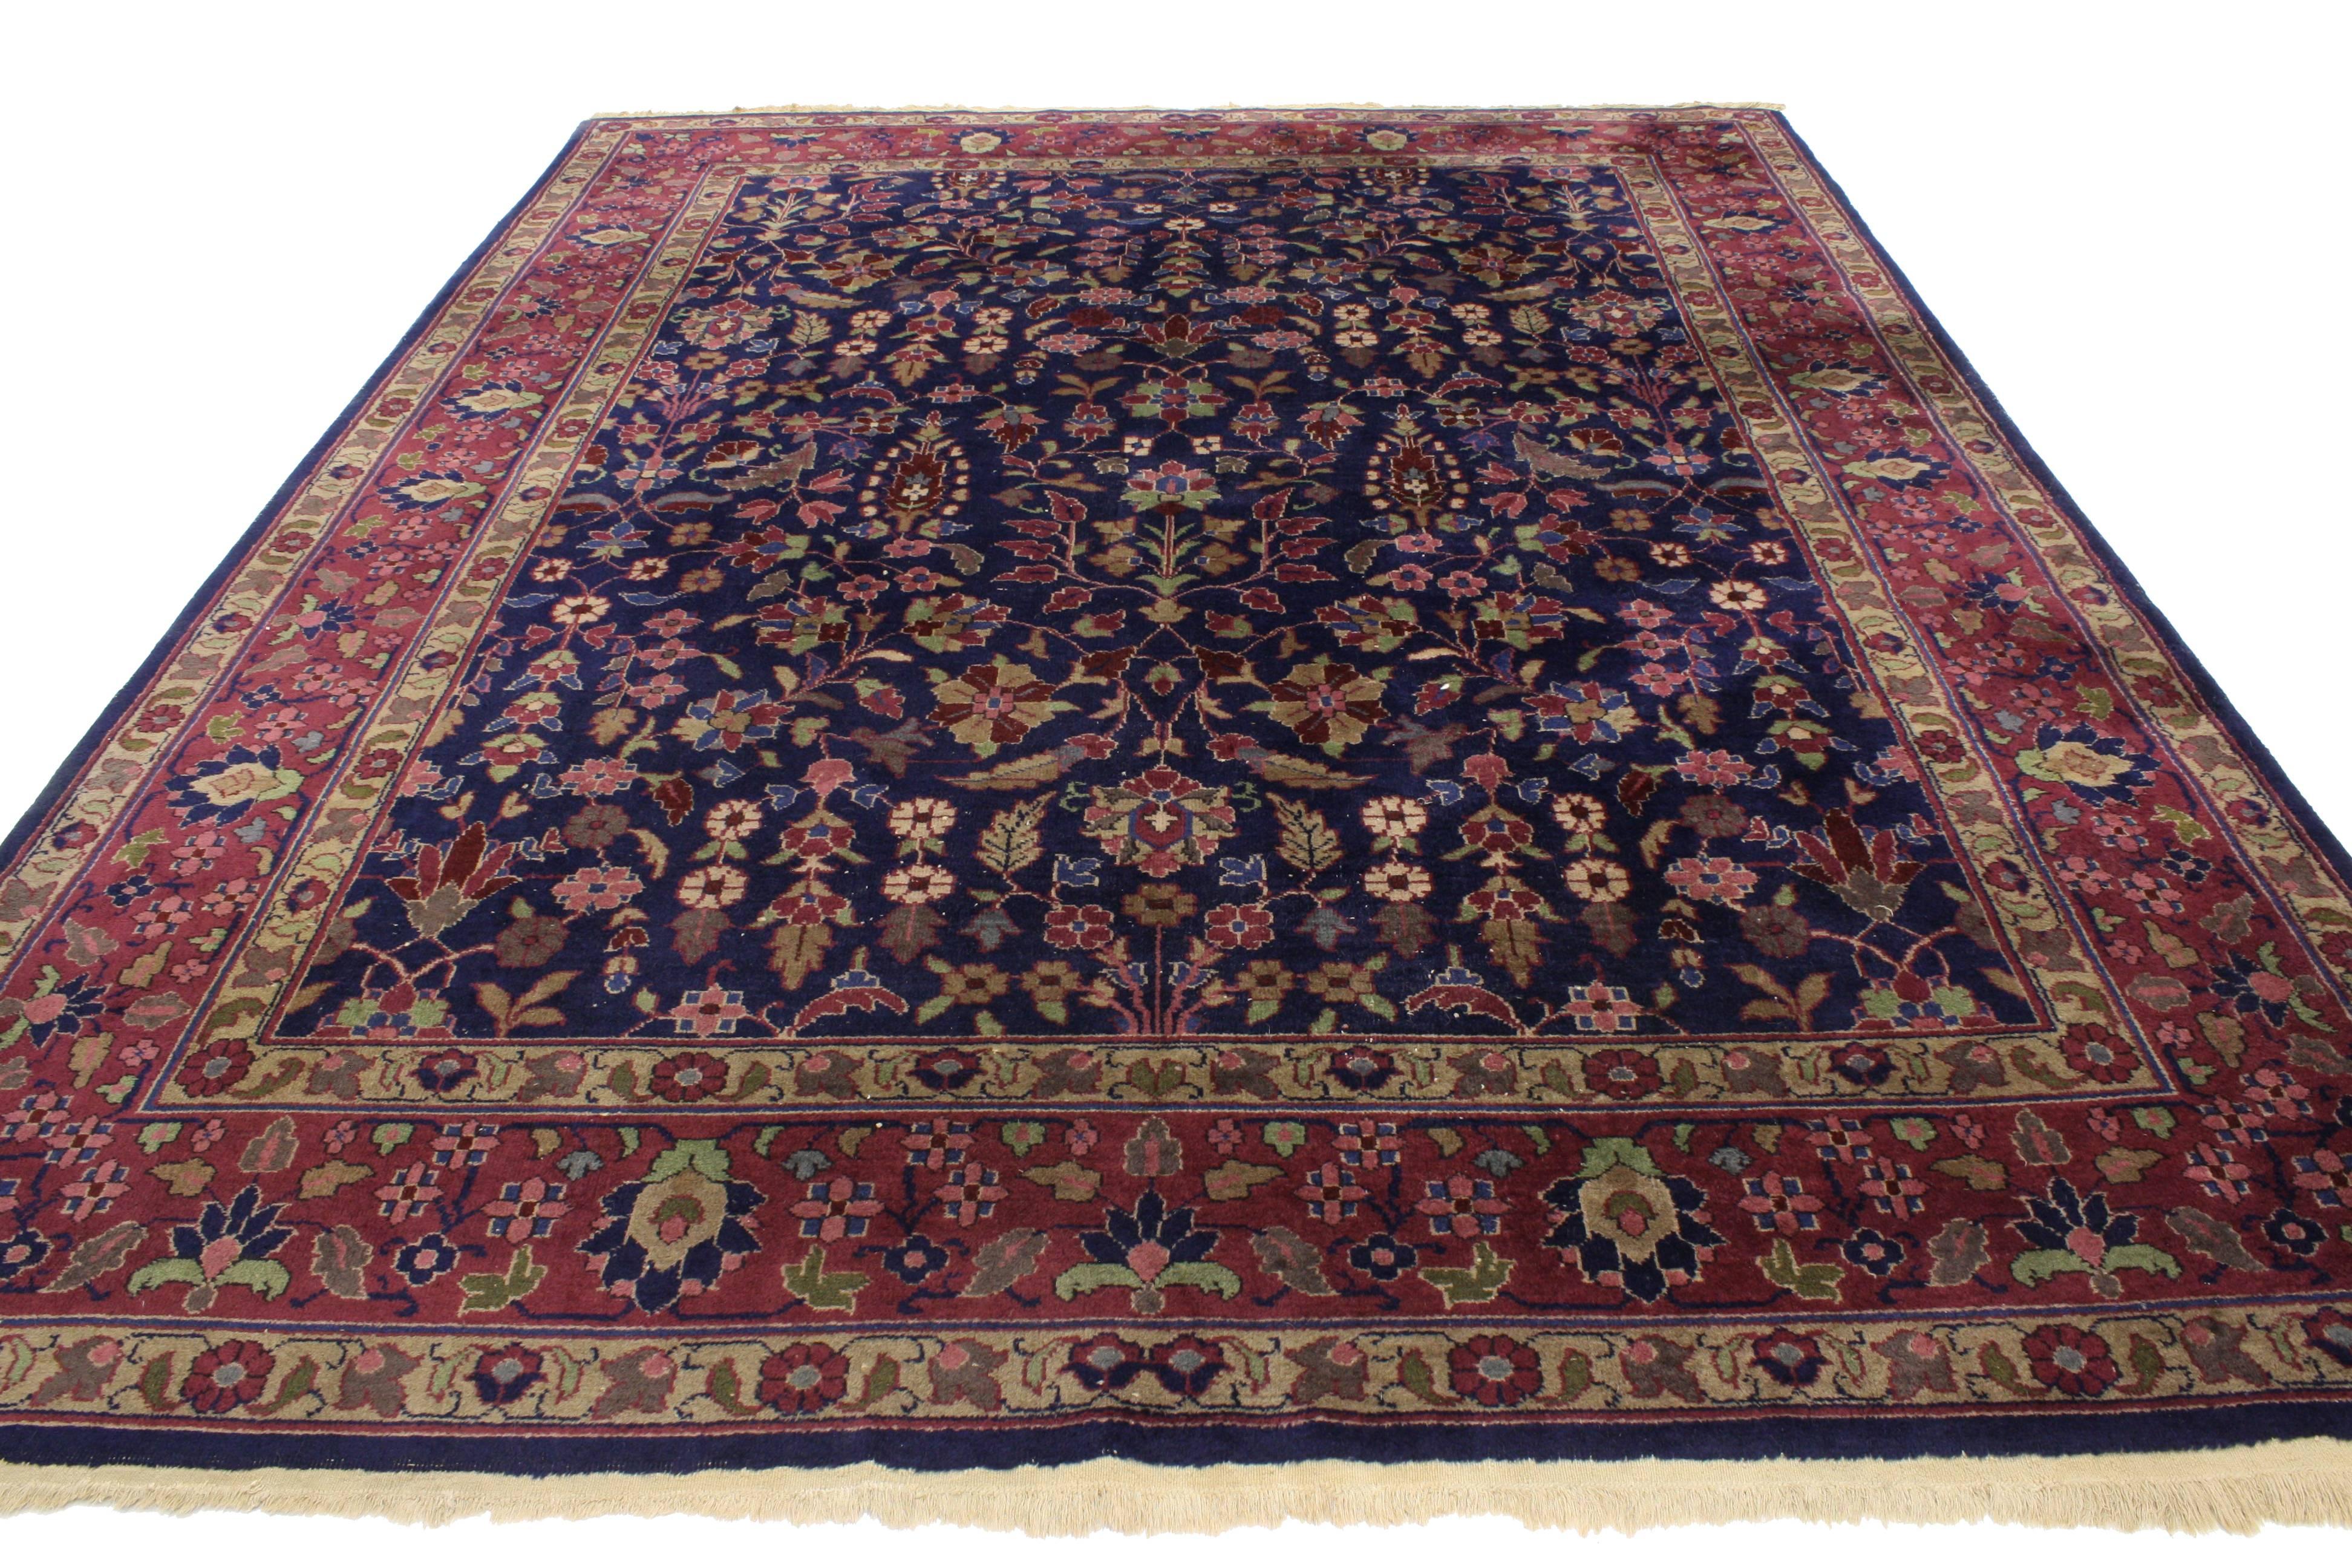 Antique Indian Area Rug with Modern Victorian Style In Good Condition For Sale In Dallas, TX